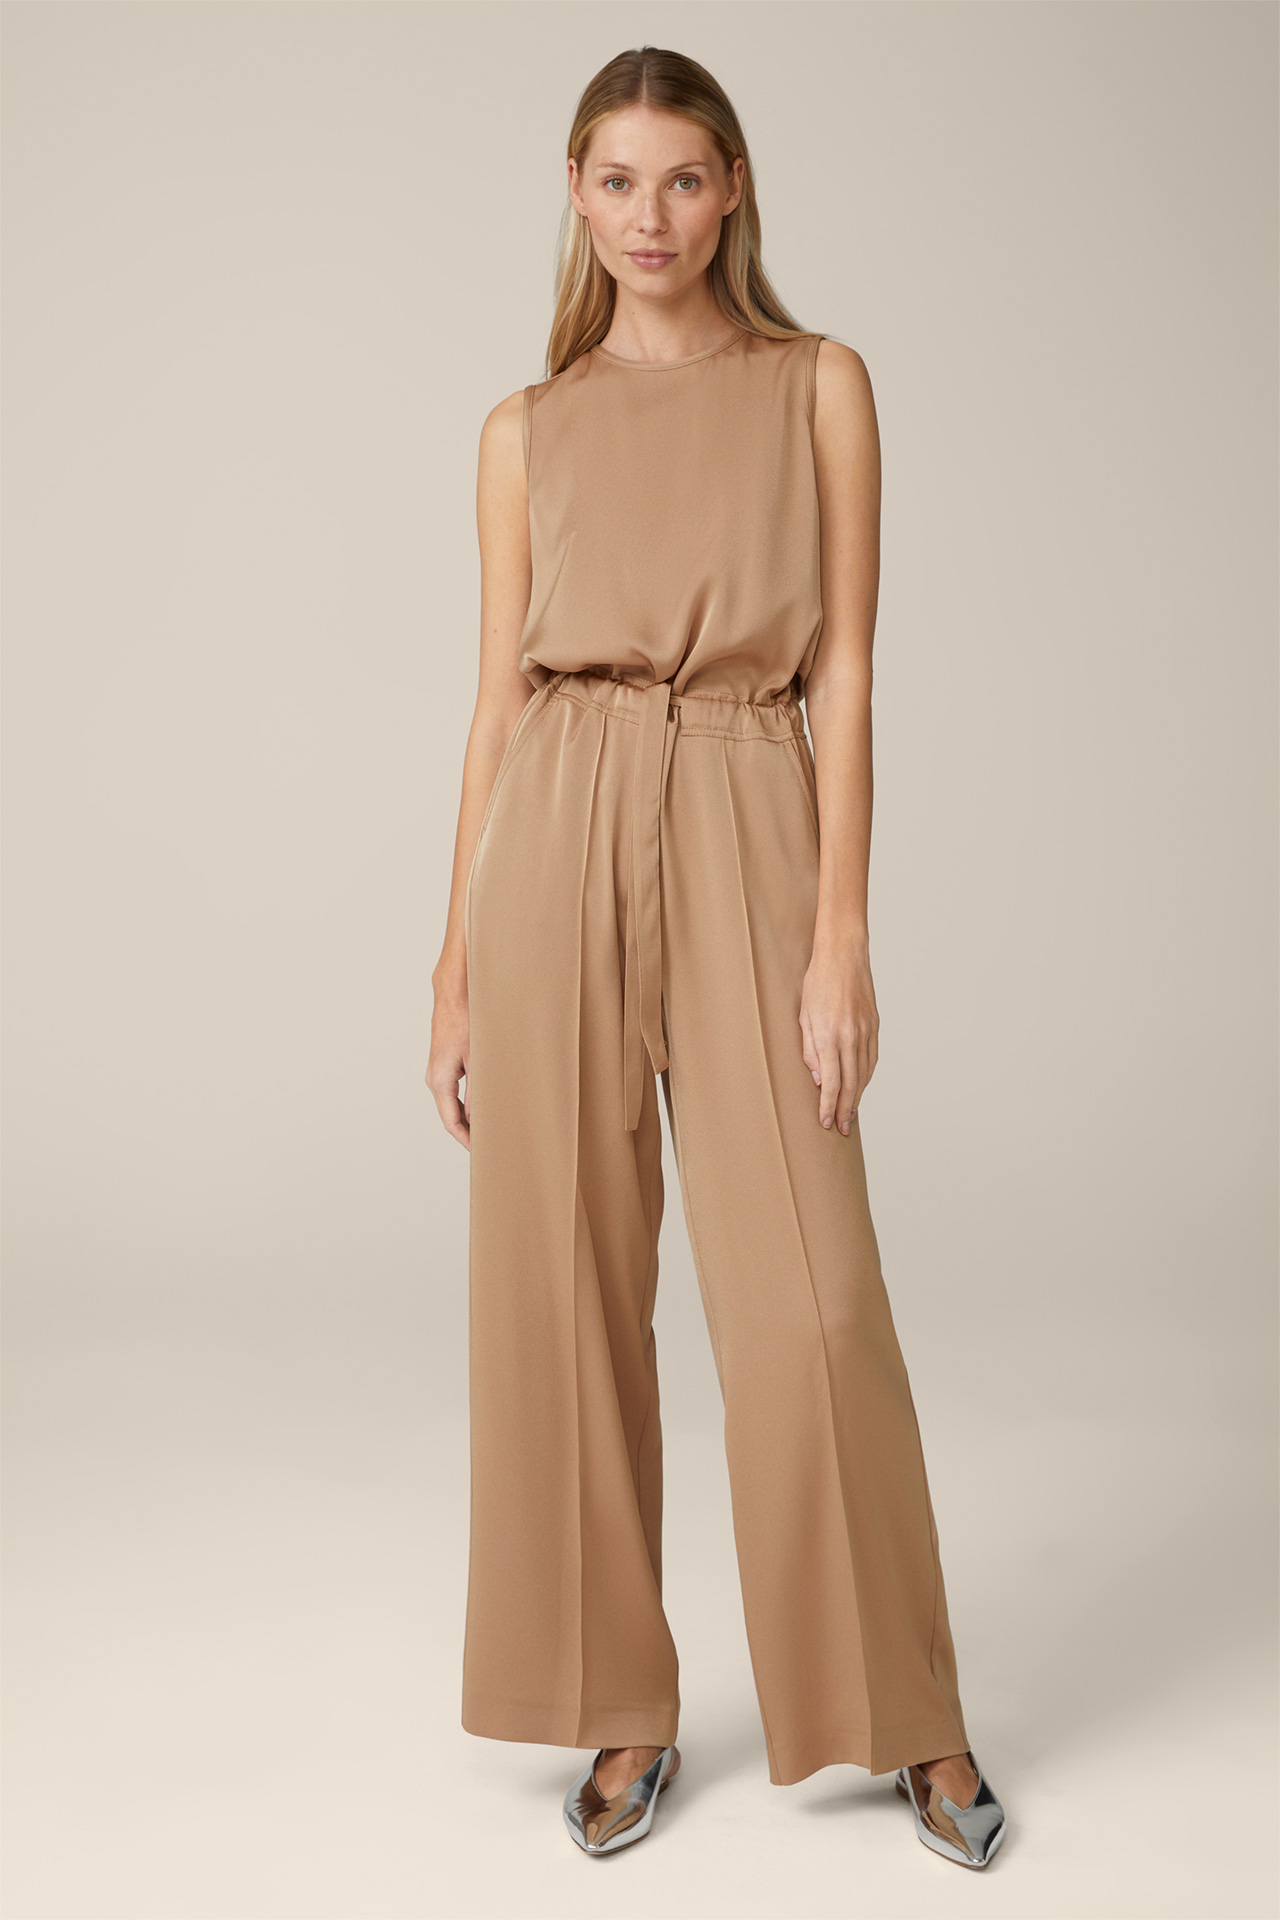 Crêpe Overall in Camel